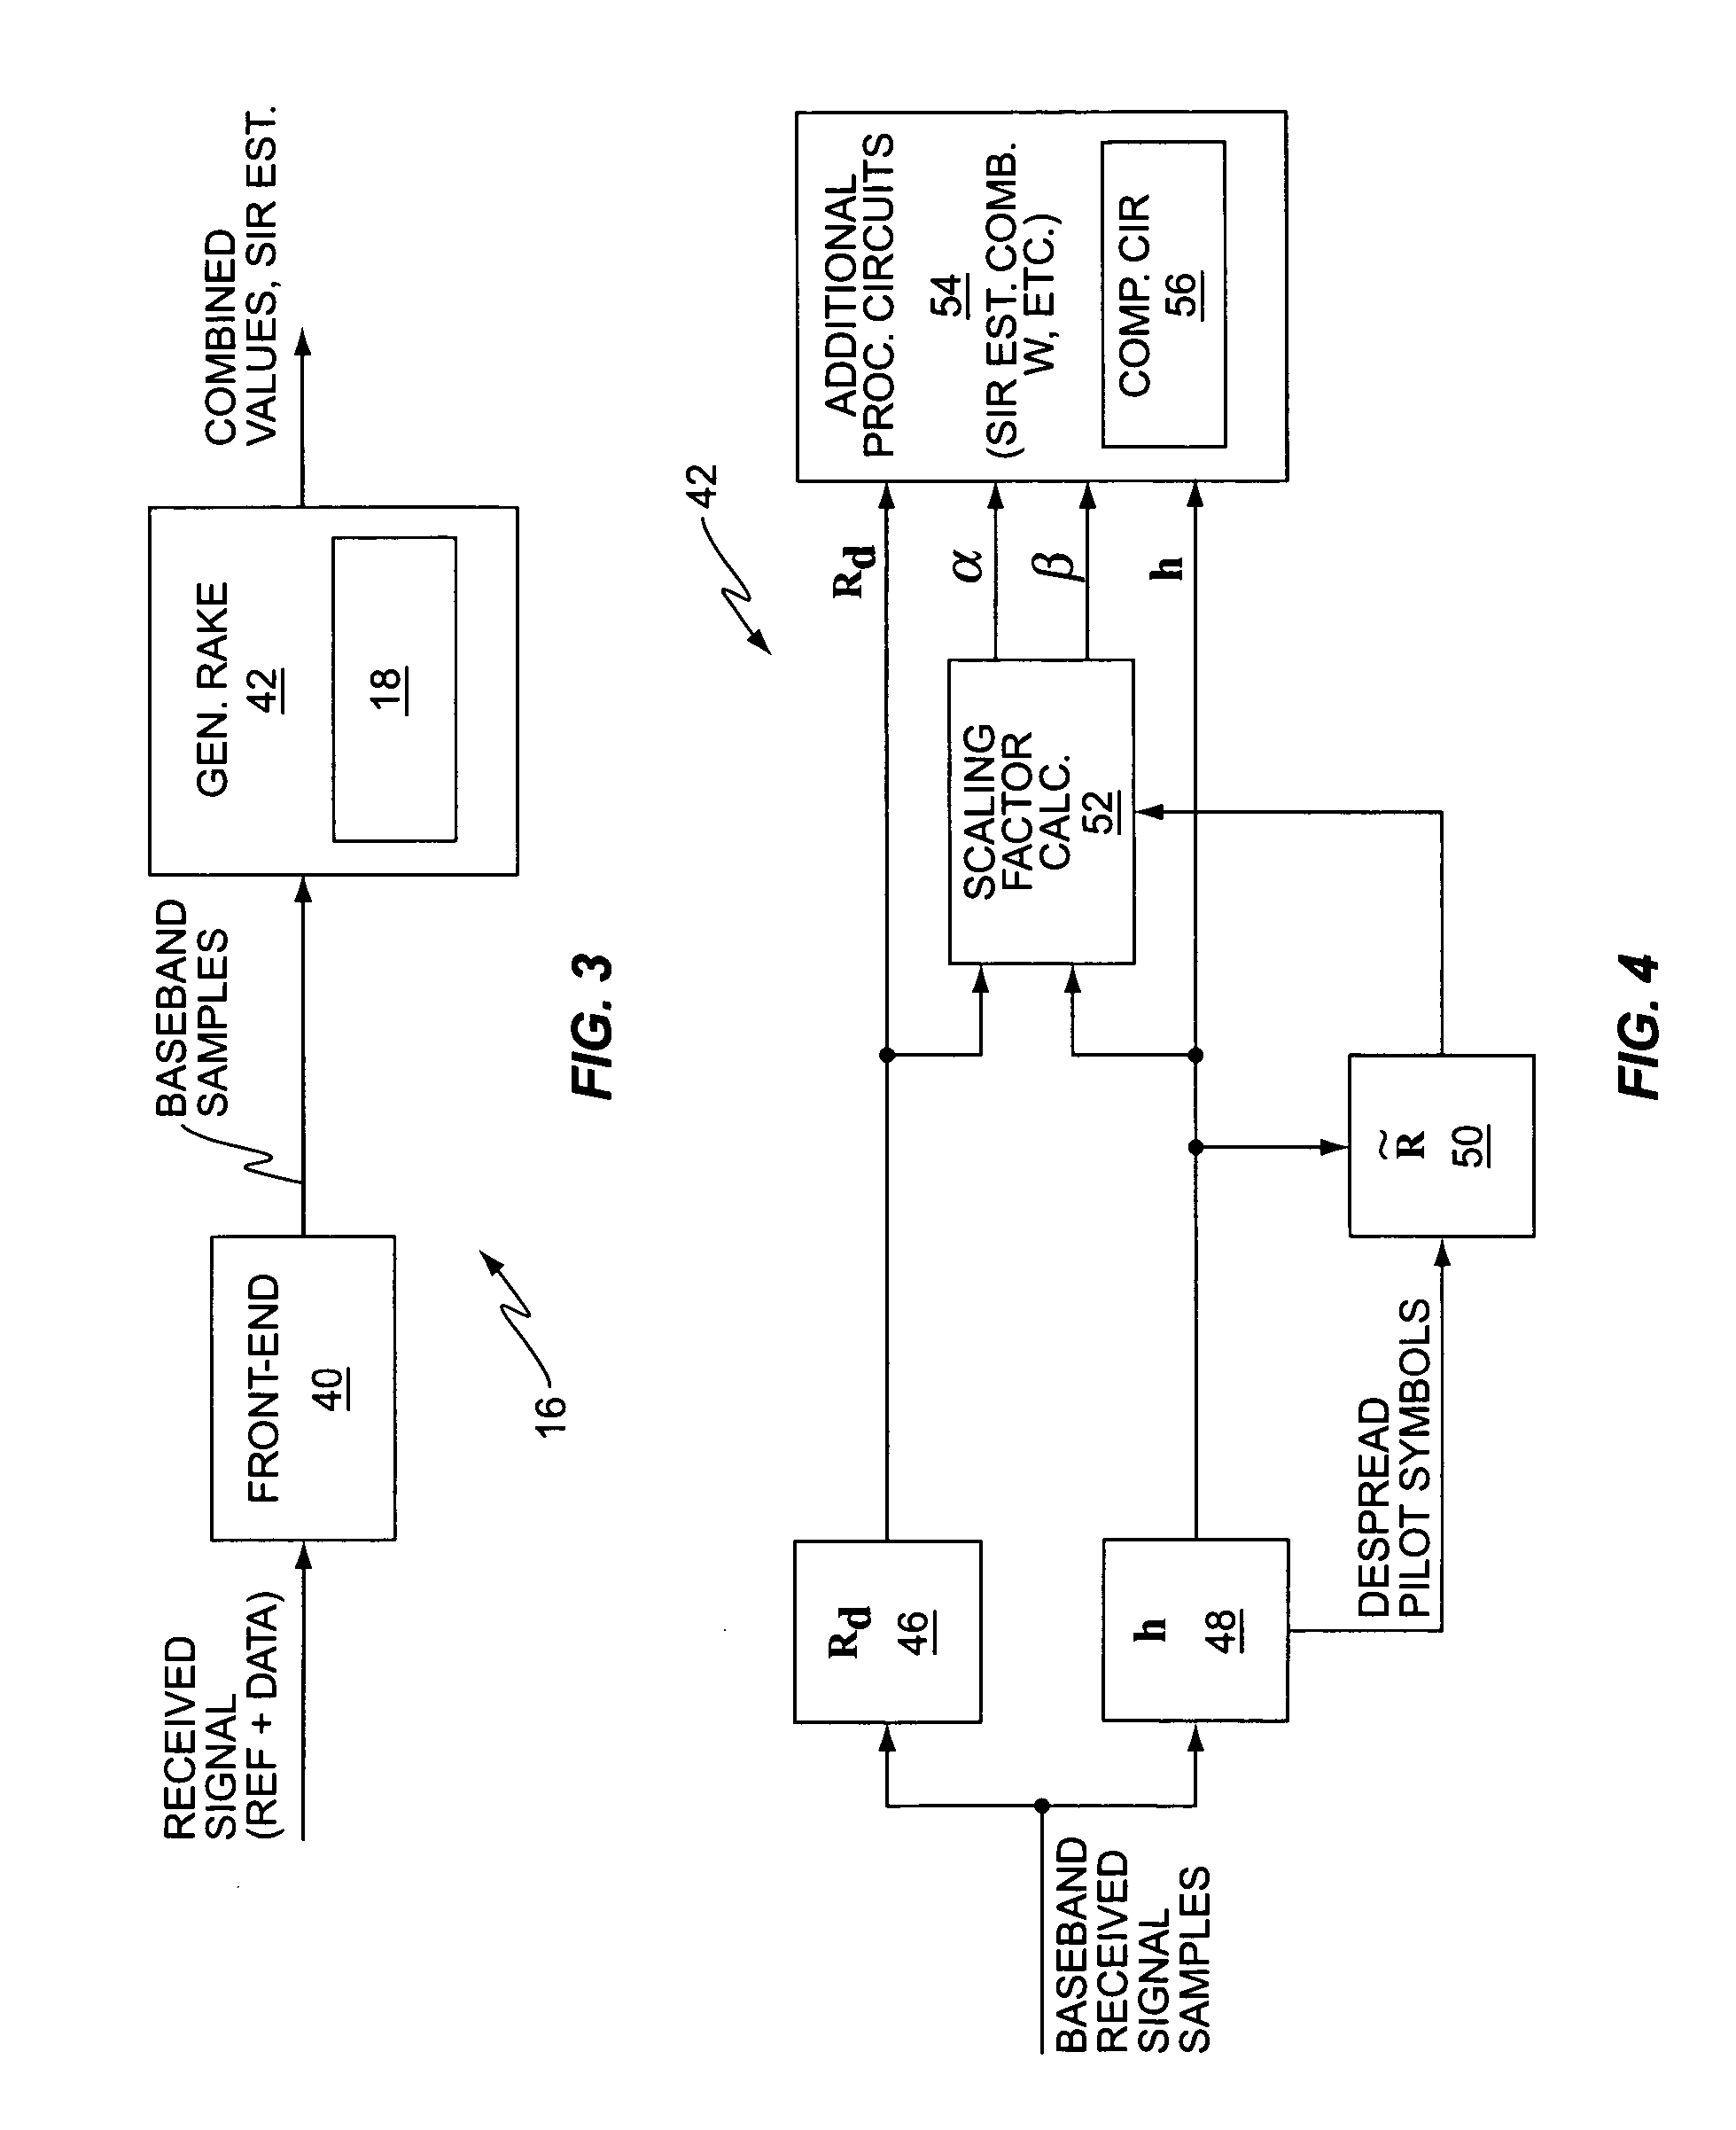 Method and apparatus for using chip sample correlations in one or more received signal processing operations